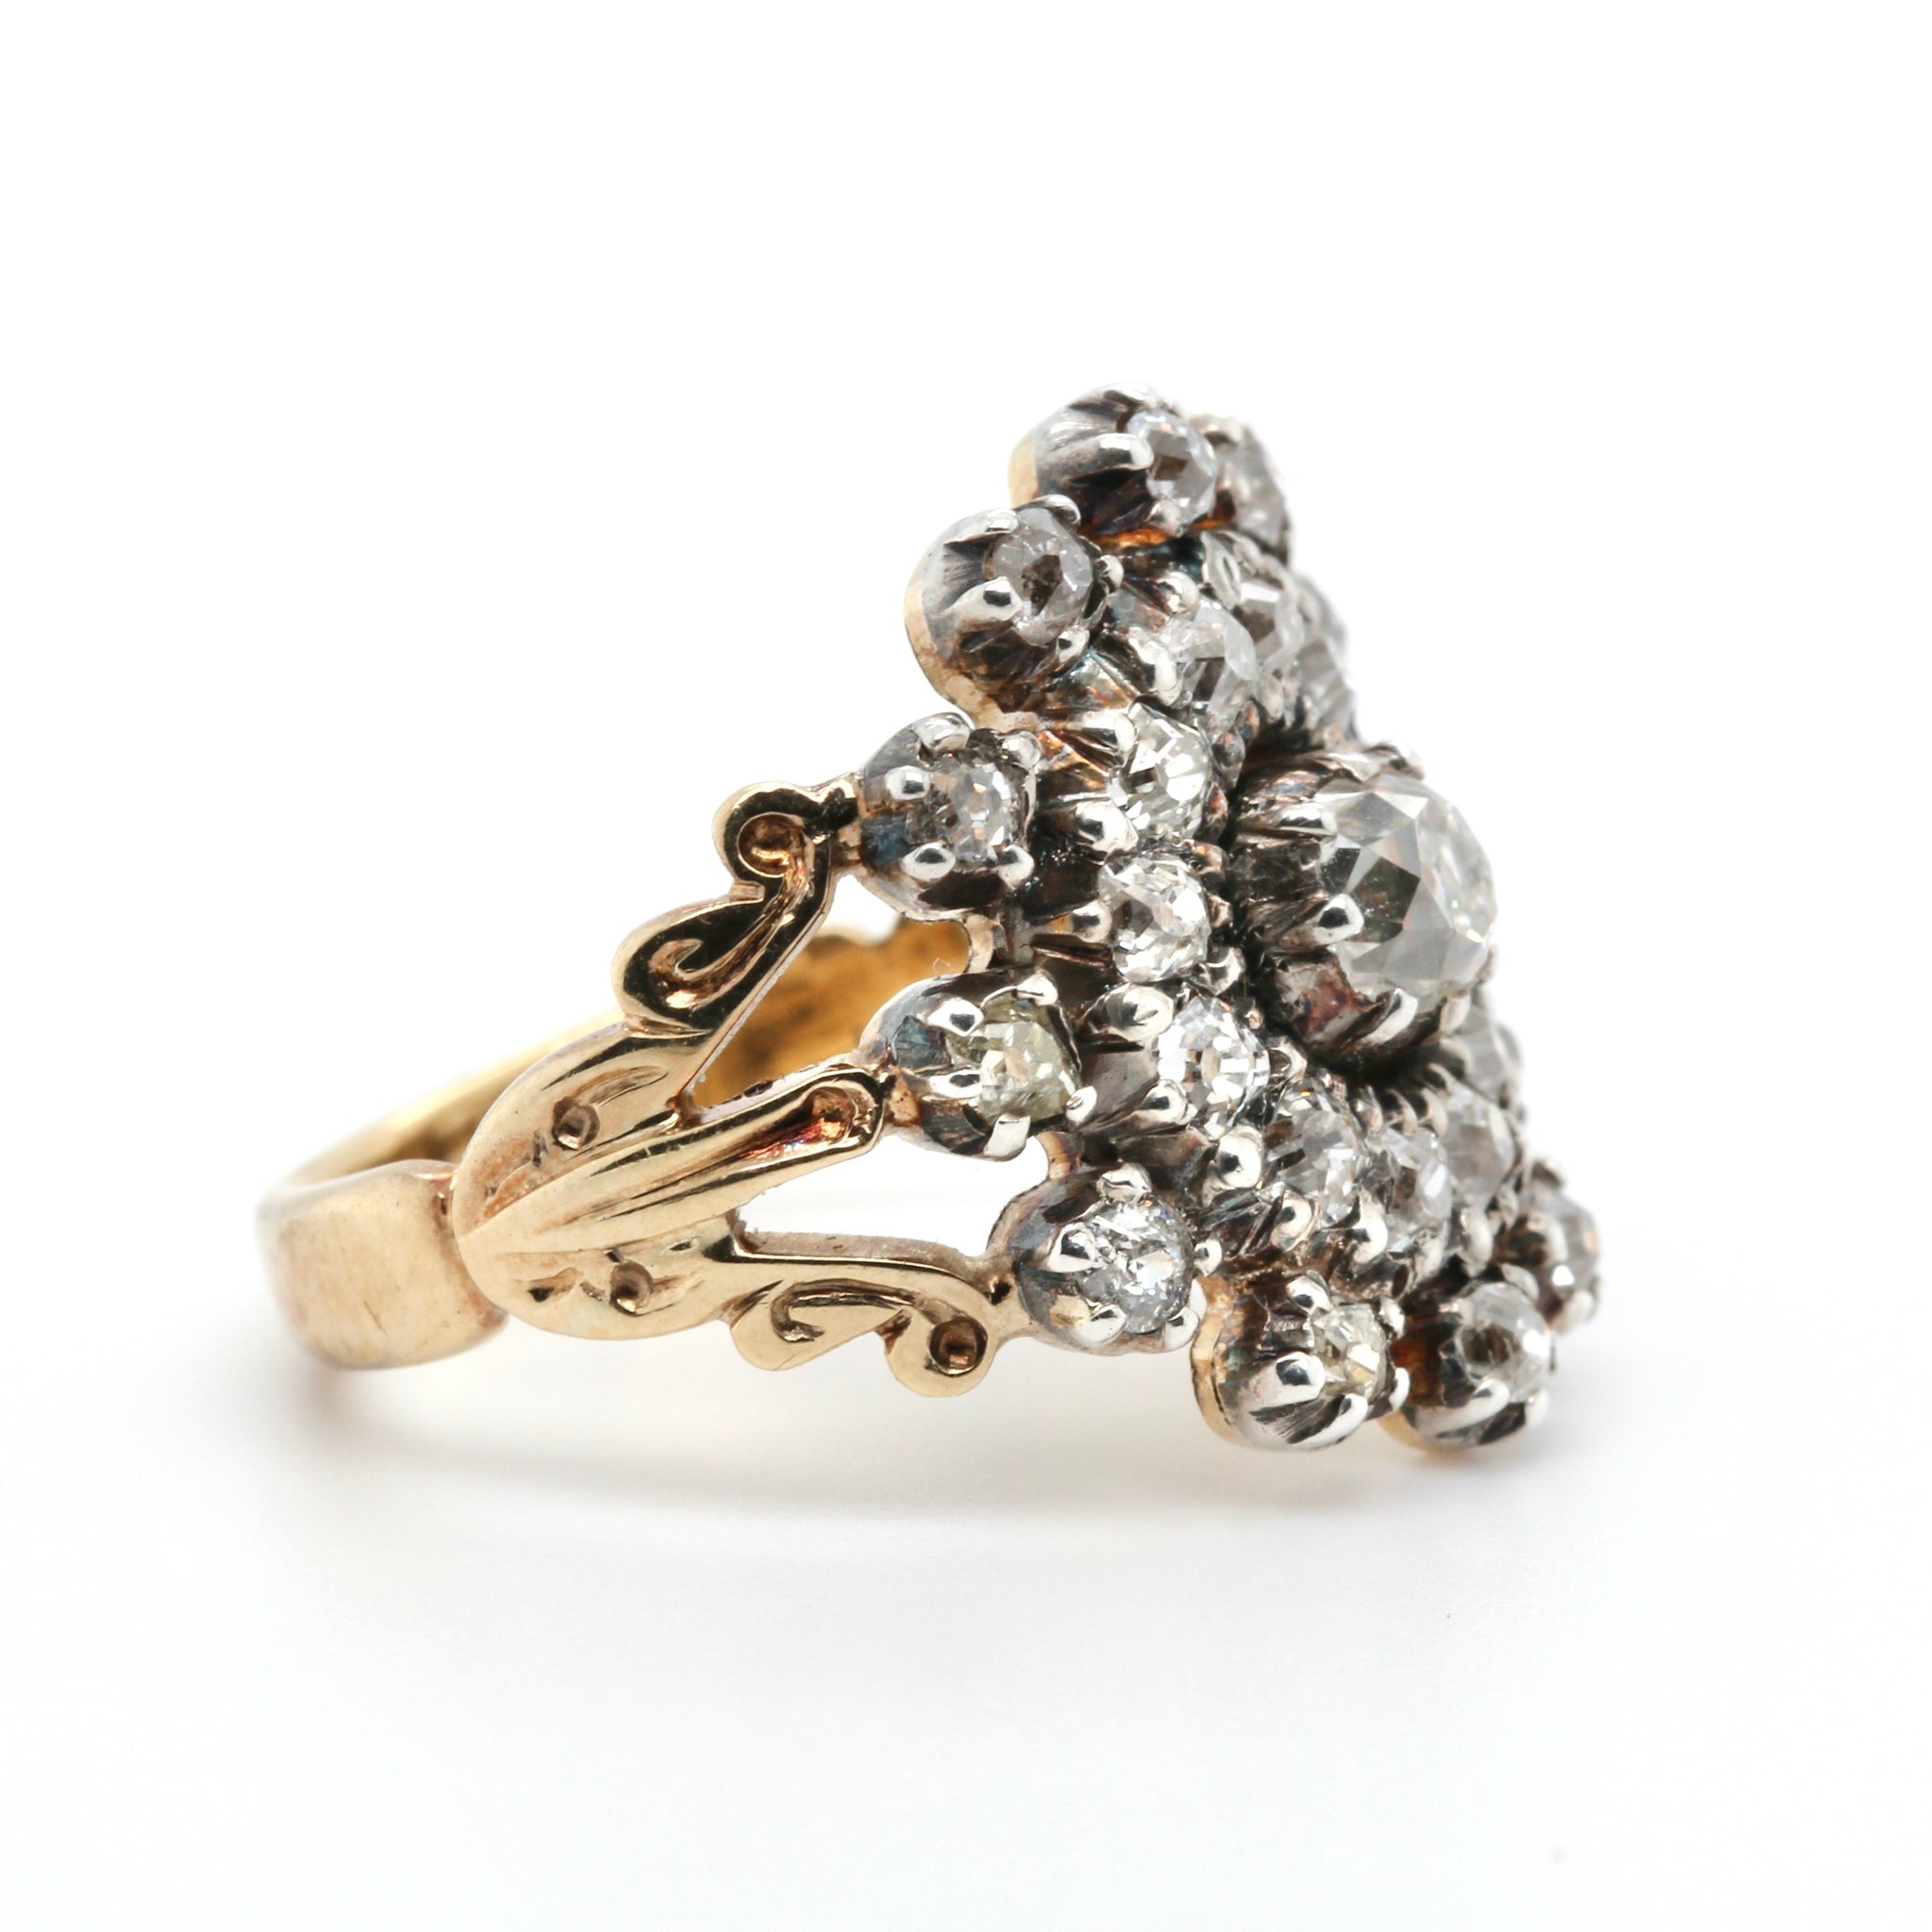 Early Victorian Old Cut Diamond Cluster Ring